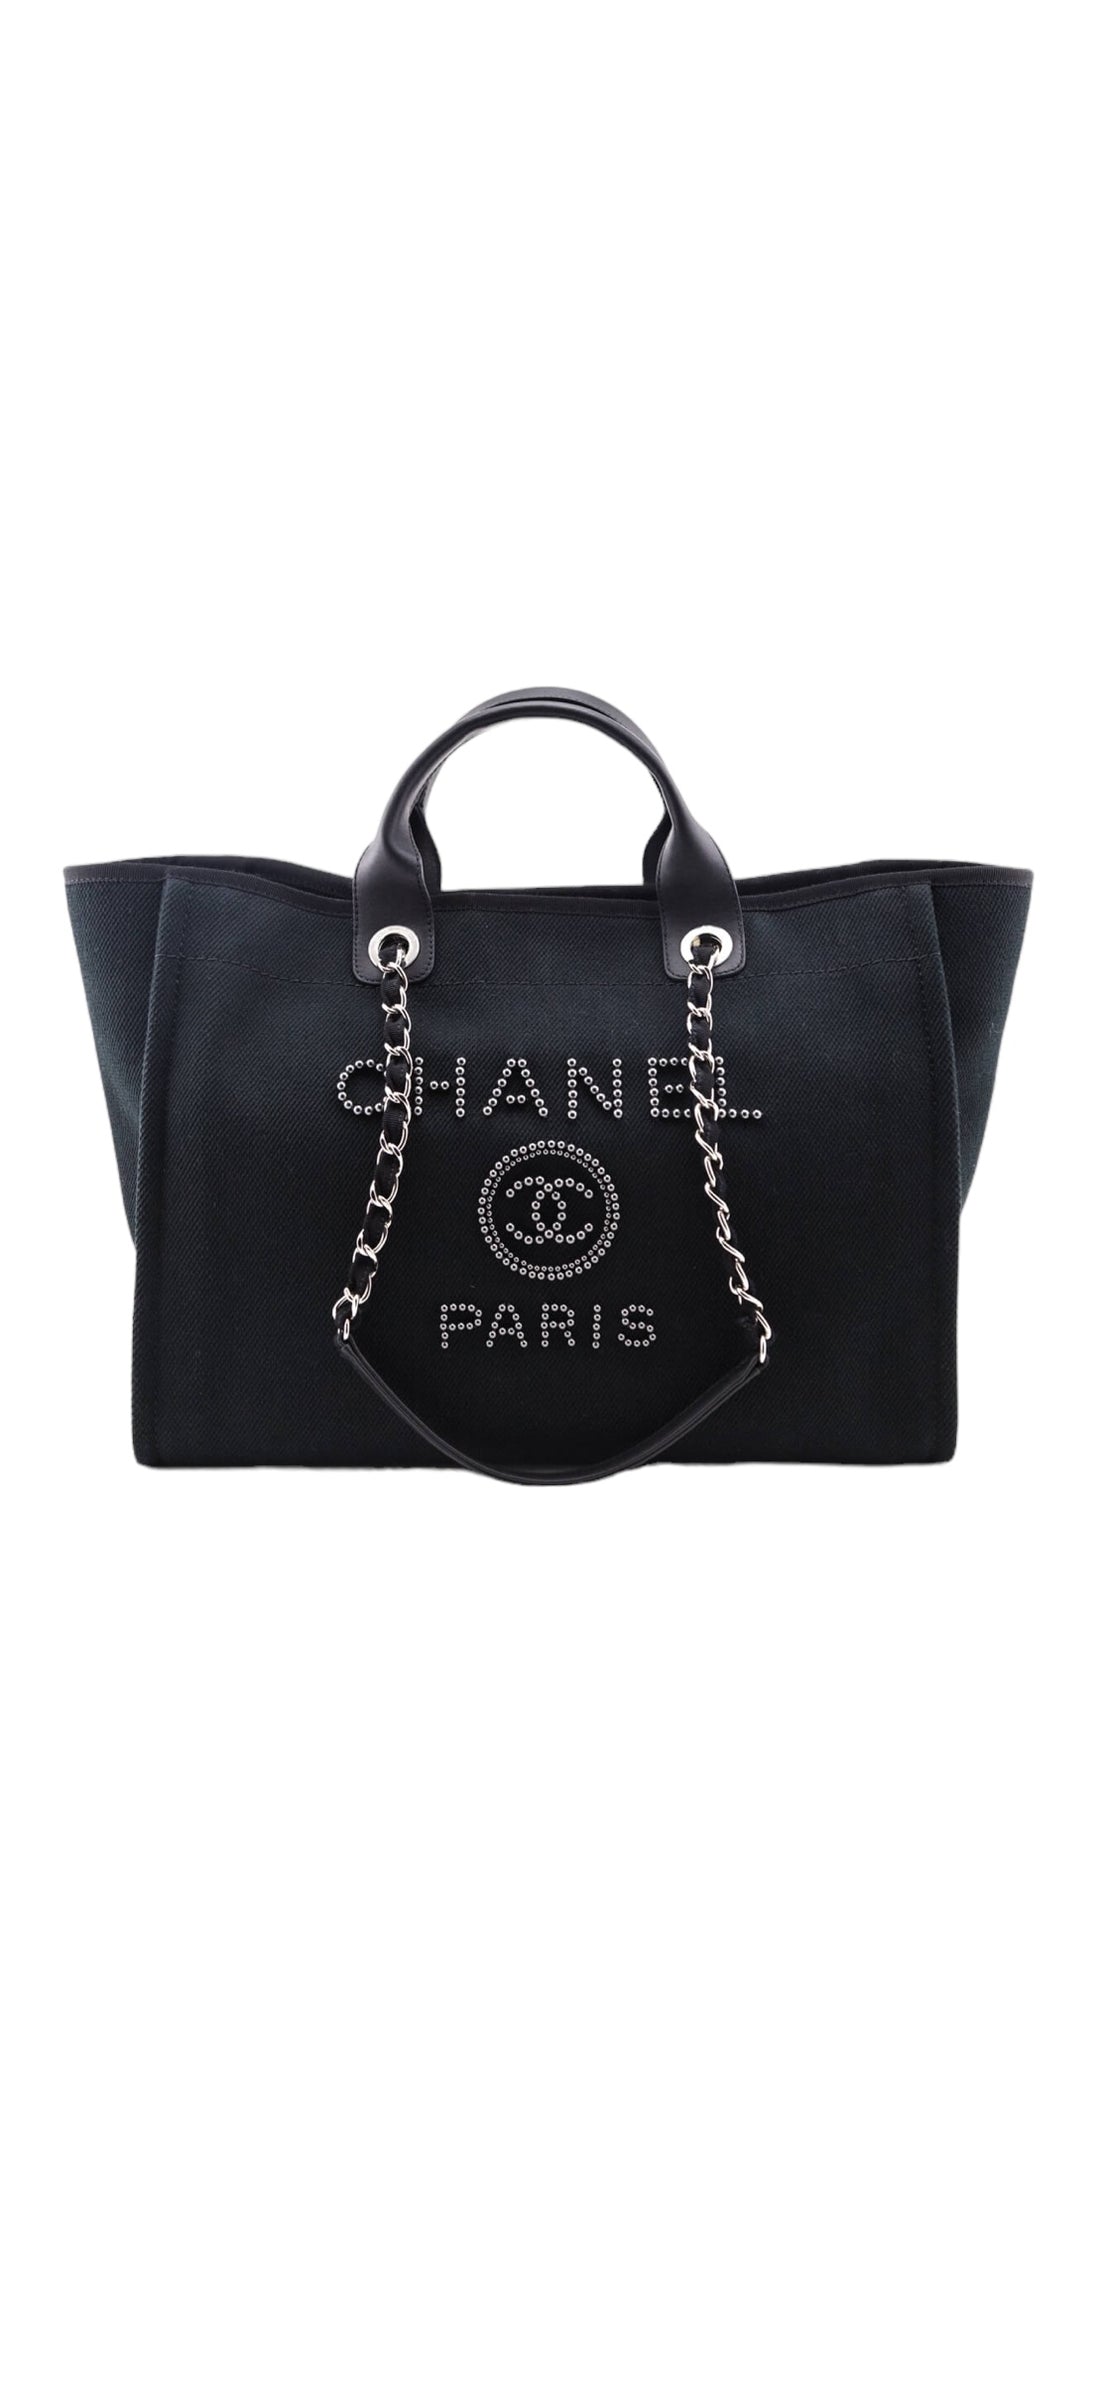 Chanel Deauville Tote Pearl Embellished Black